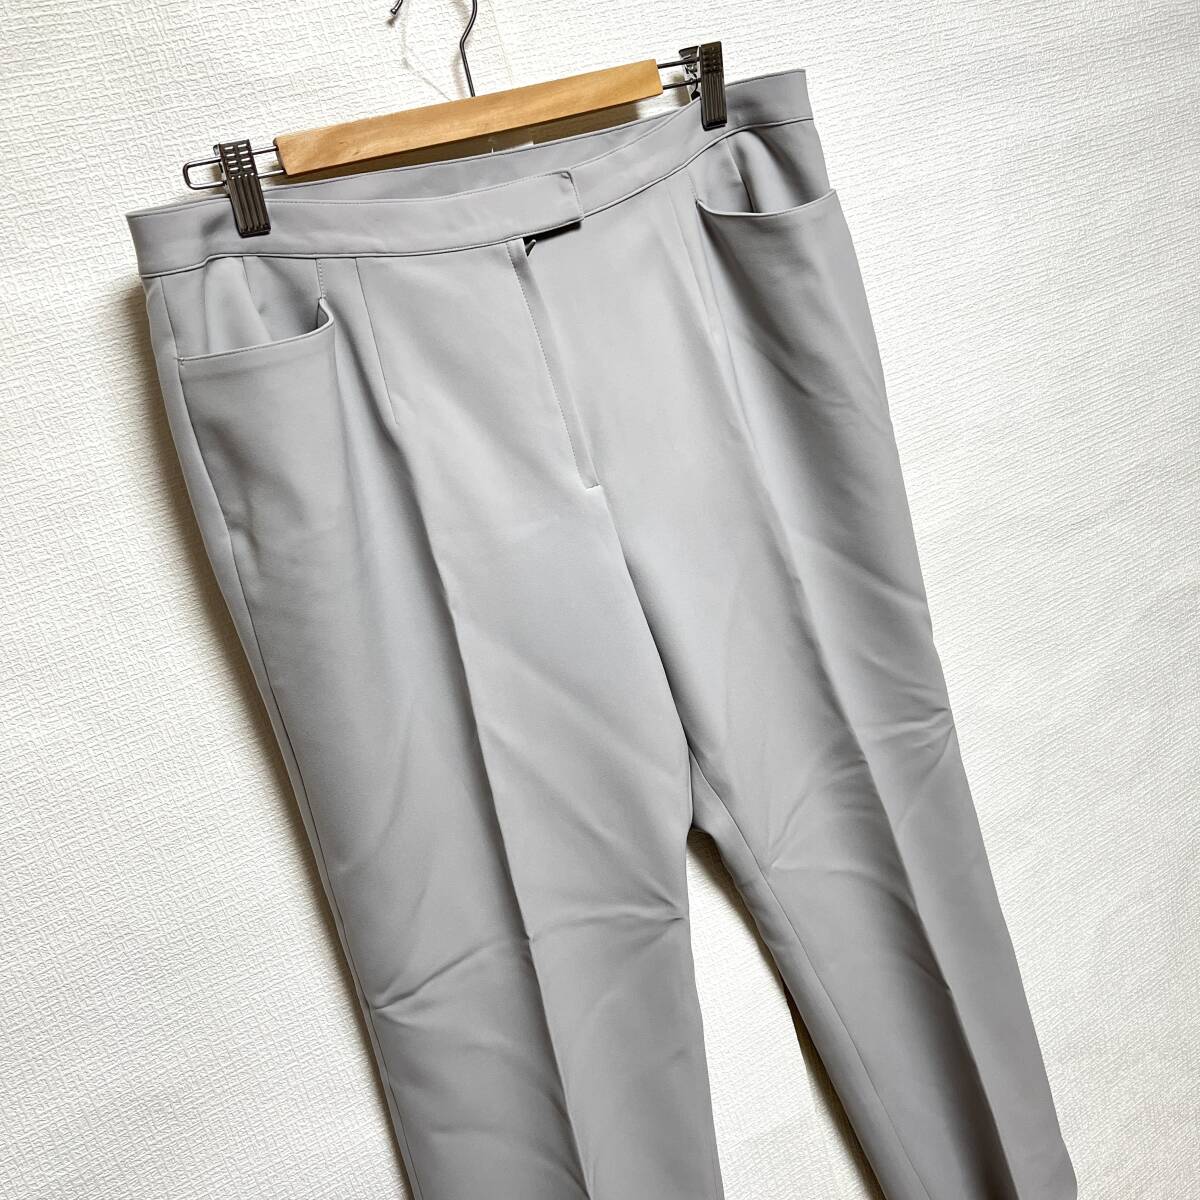  prompt decision Leilian Leilian lady's pants large size 17+ gray series letter pack post service possible (862392)